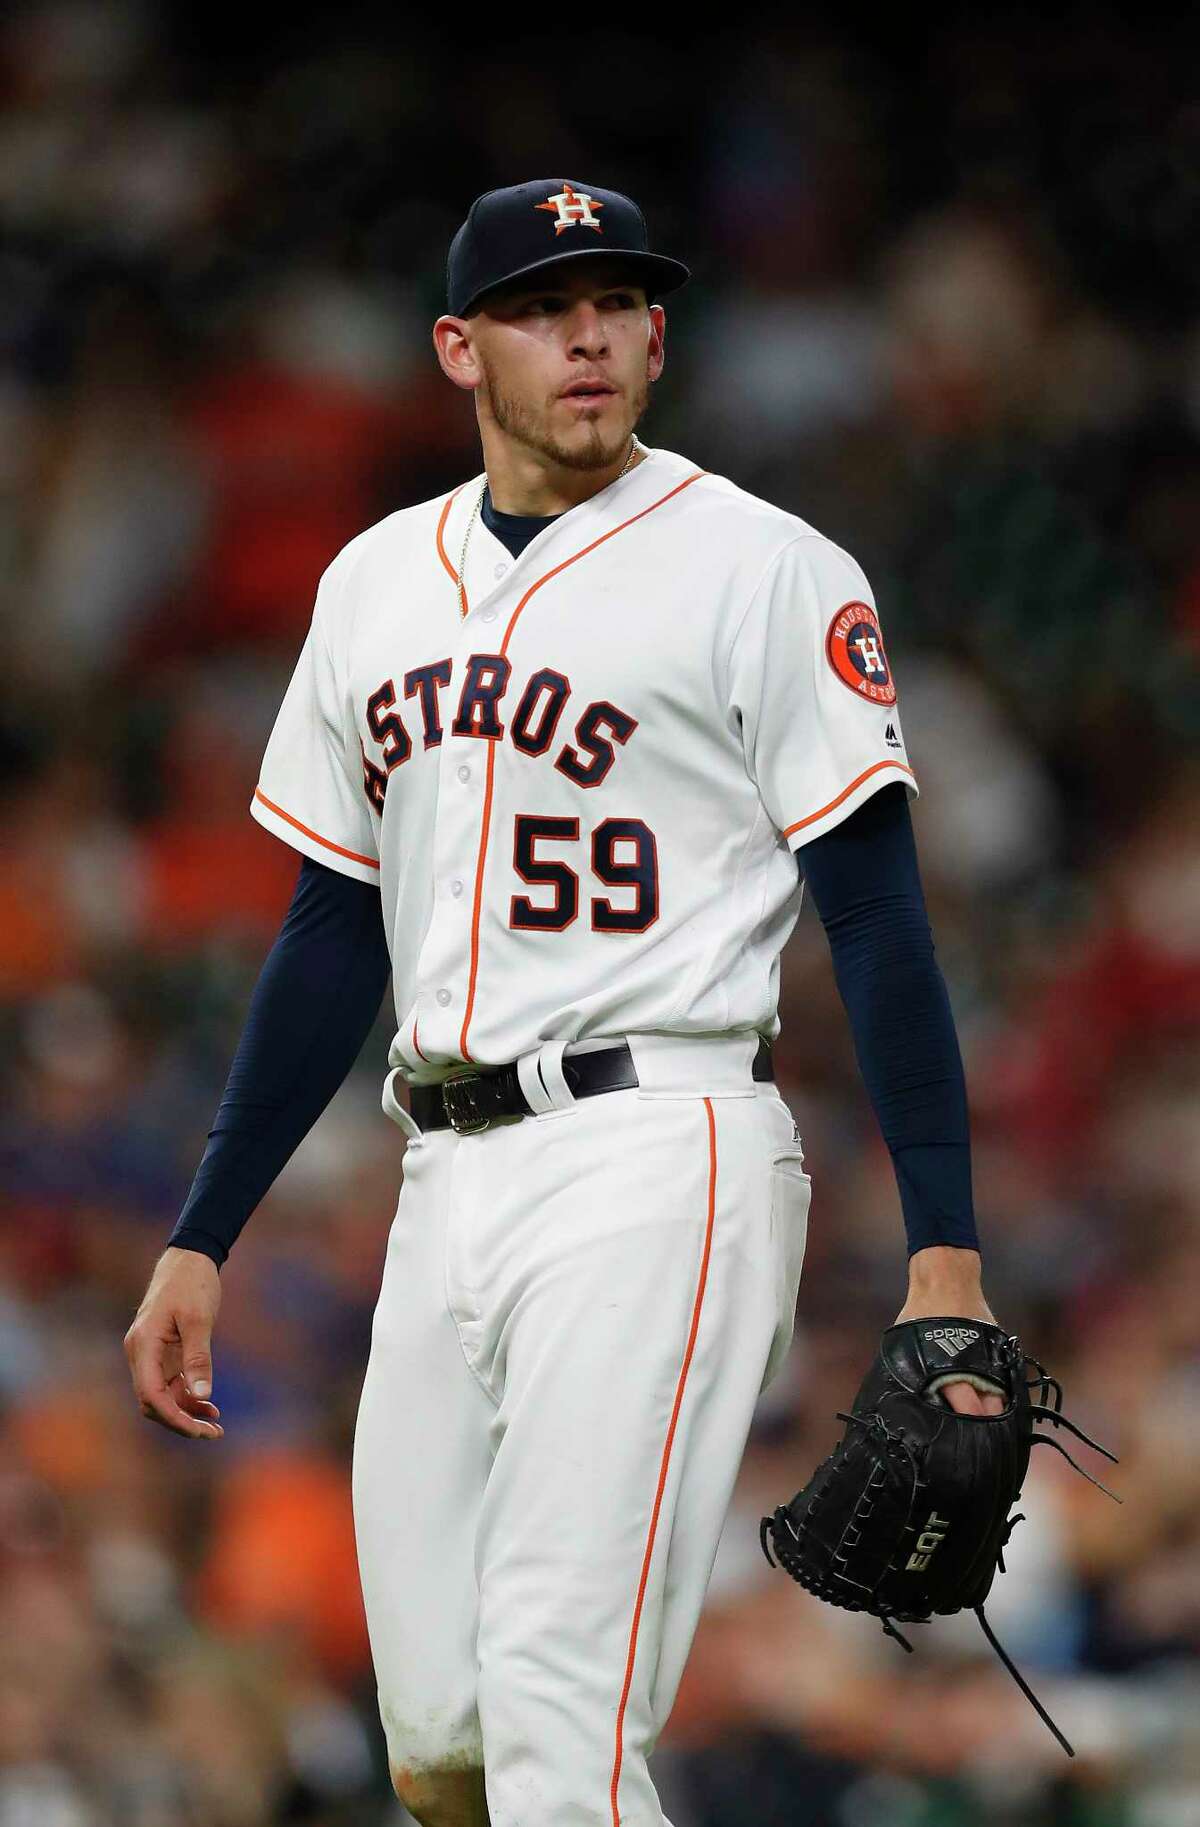 Houston Astros starting pitcher Joe Musgrove (59) reacts after getting pulled during the fifth inning of an MLB game at Minute Maid Park, Monday, June, 12, 2017.